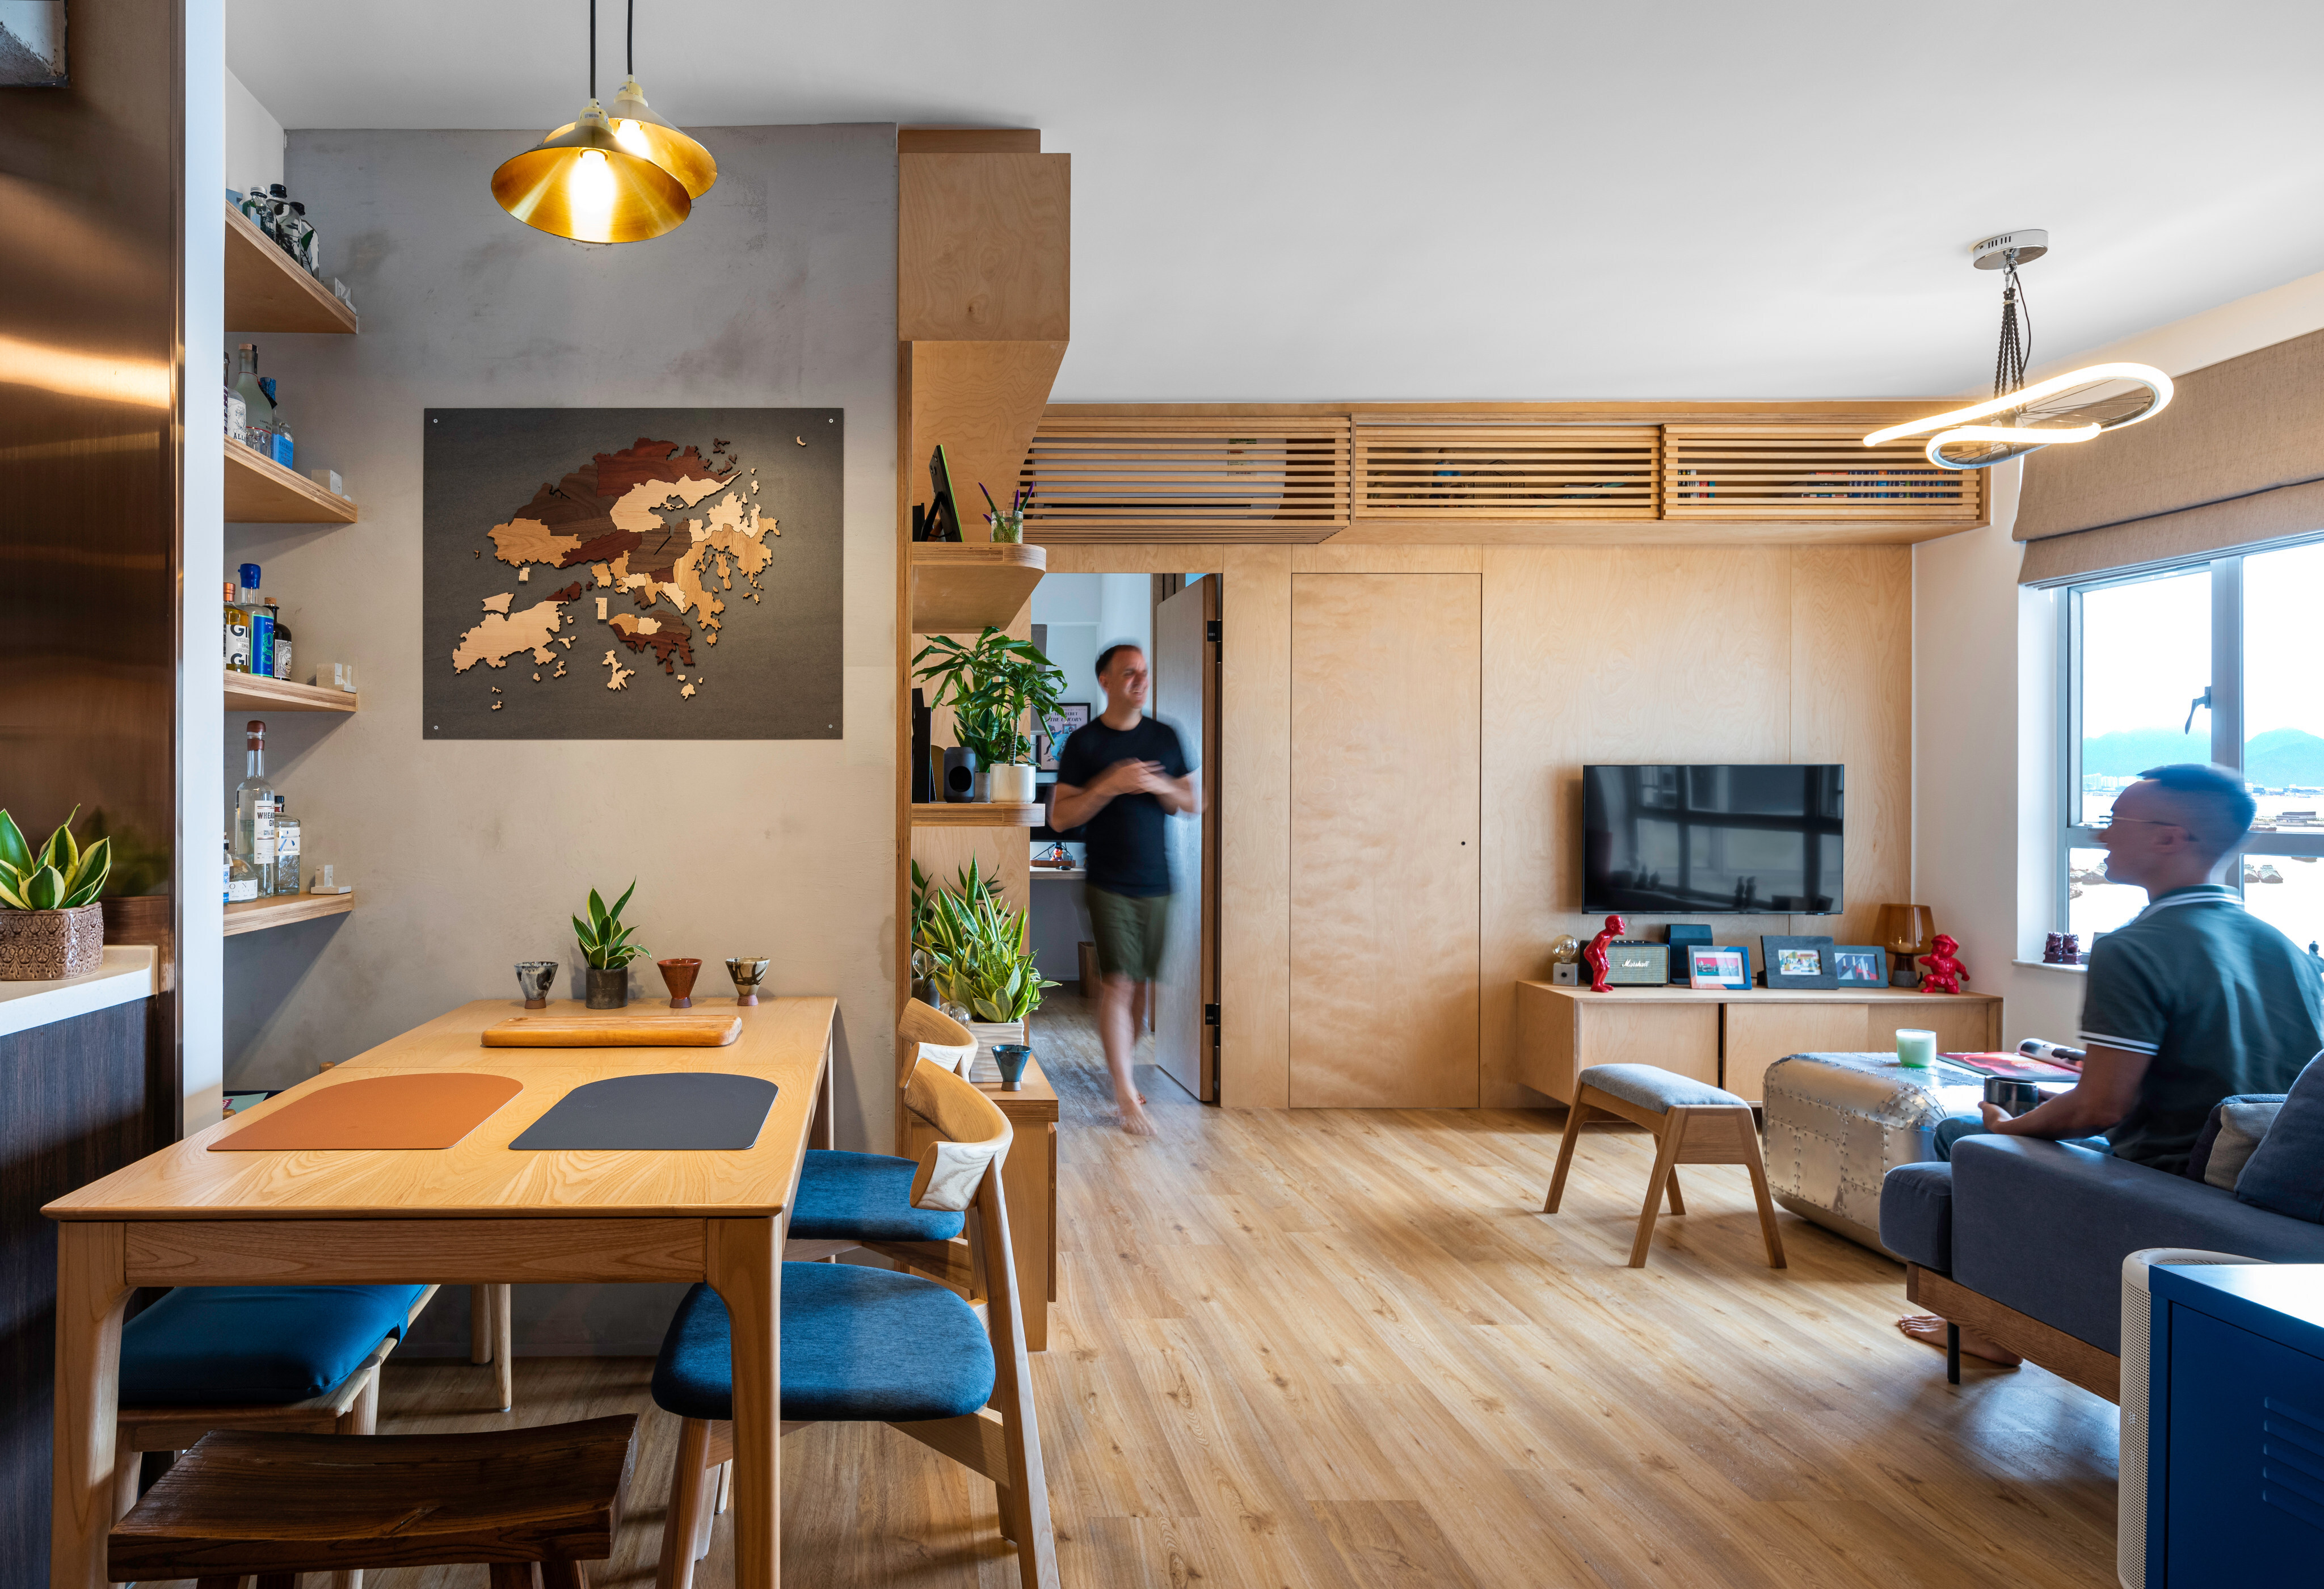 A couple’s Tuen Mun home has been made with furniture crafted by small Hong Kong makers in support of local businesses. Photo: Imagennix 